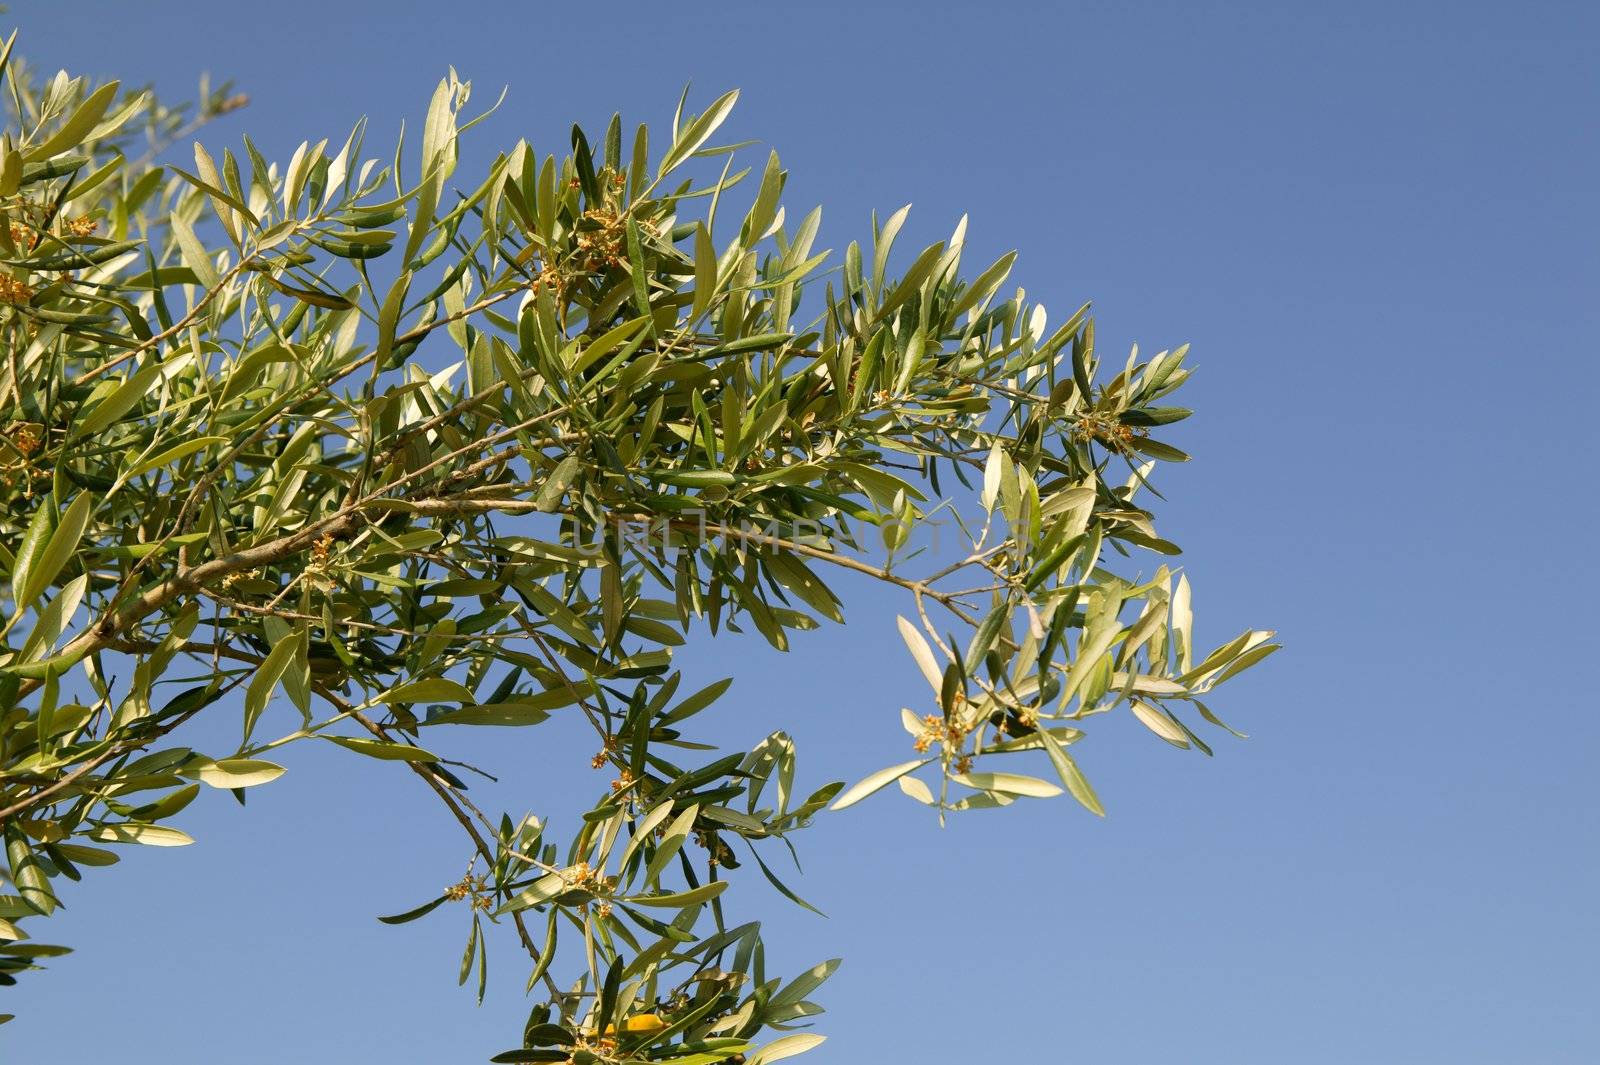 Olive tree green close up detail in southern Spain